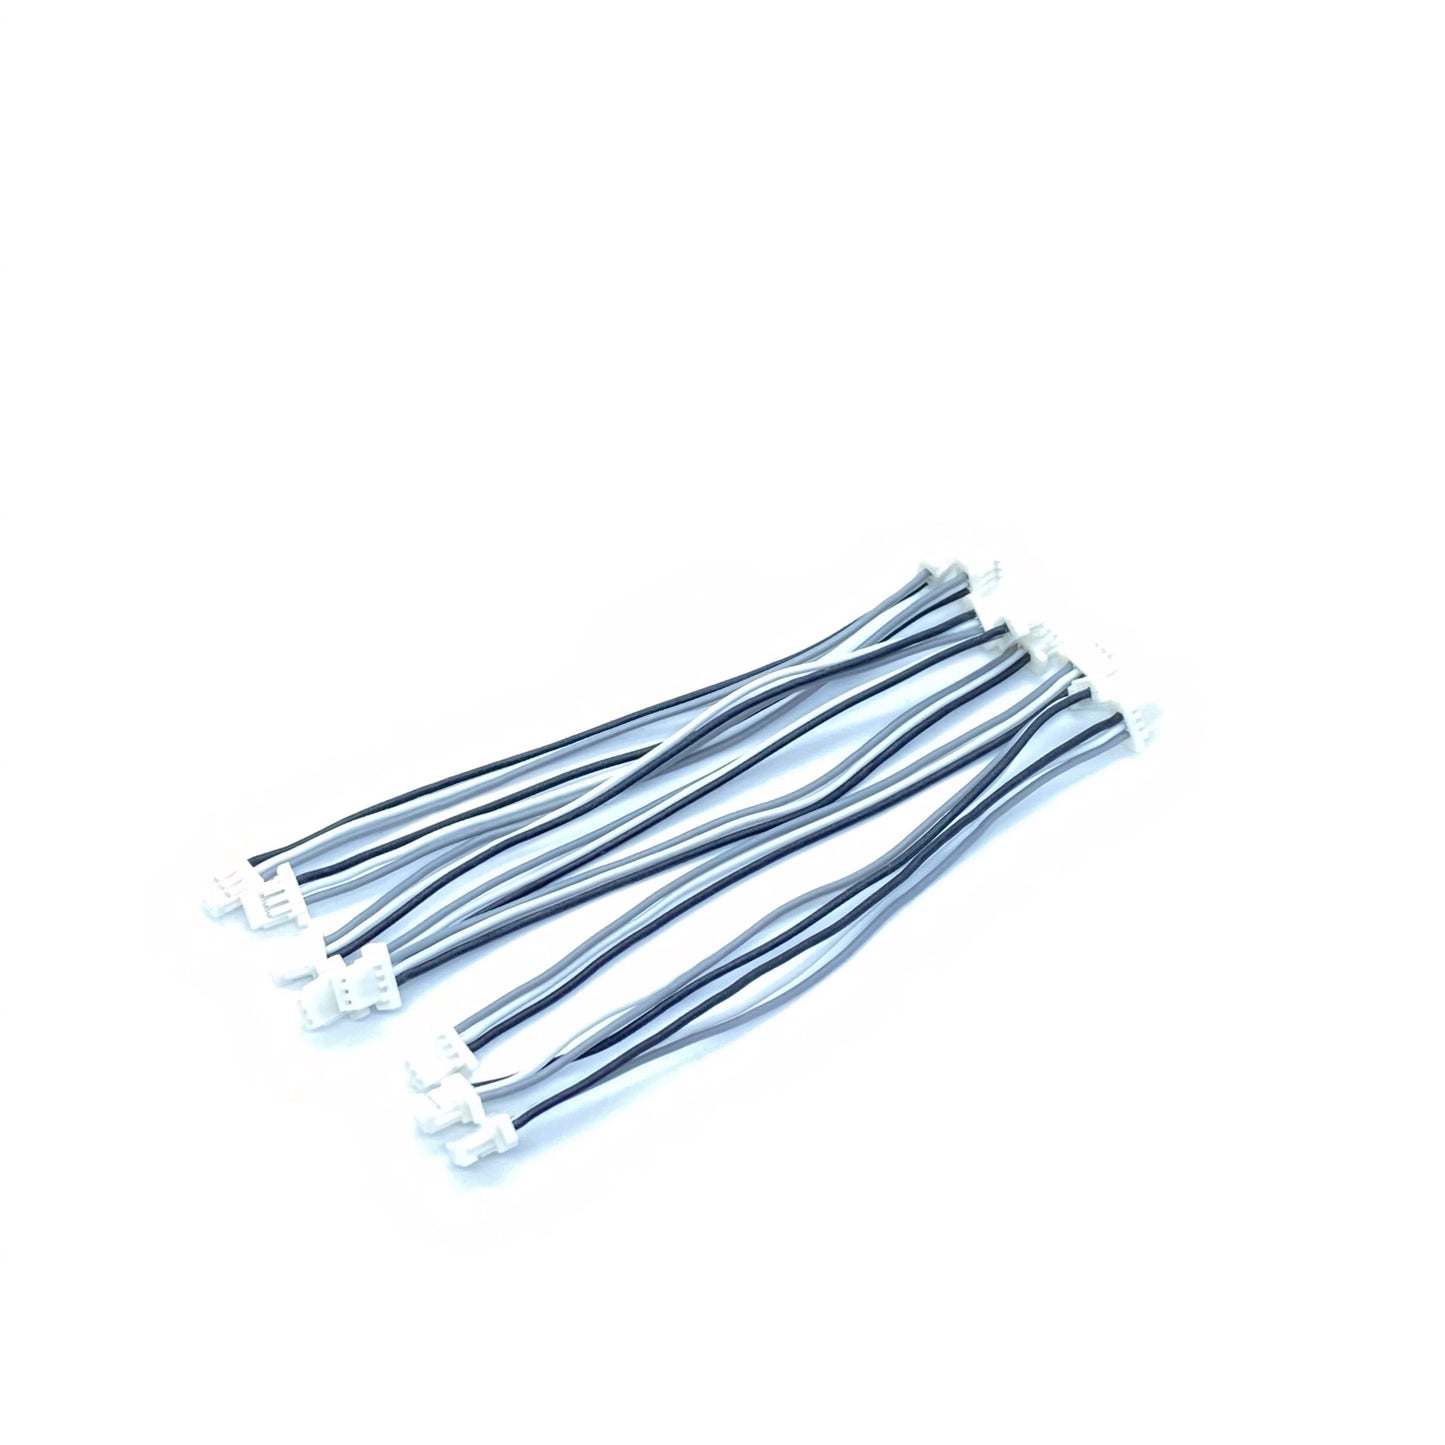 5v LED Silicone Cable Kit (8x 70mm)